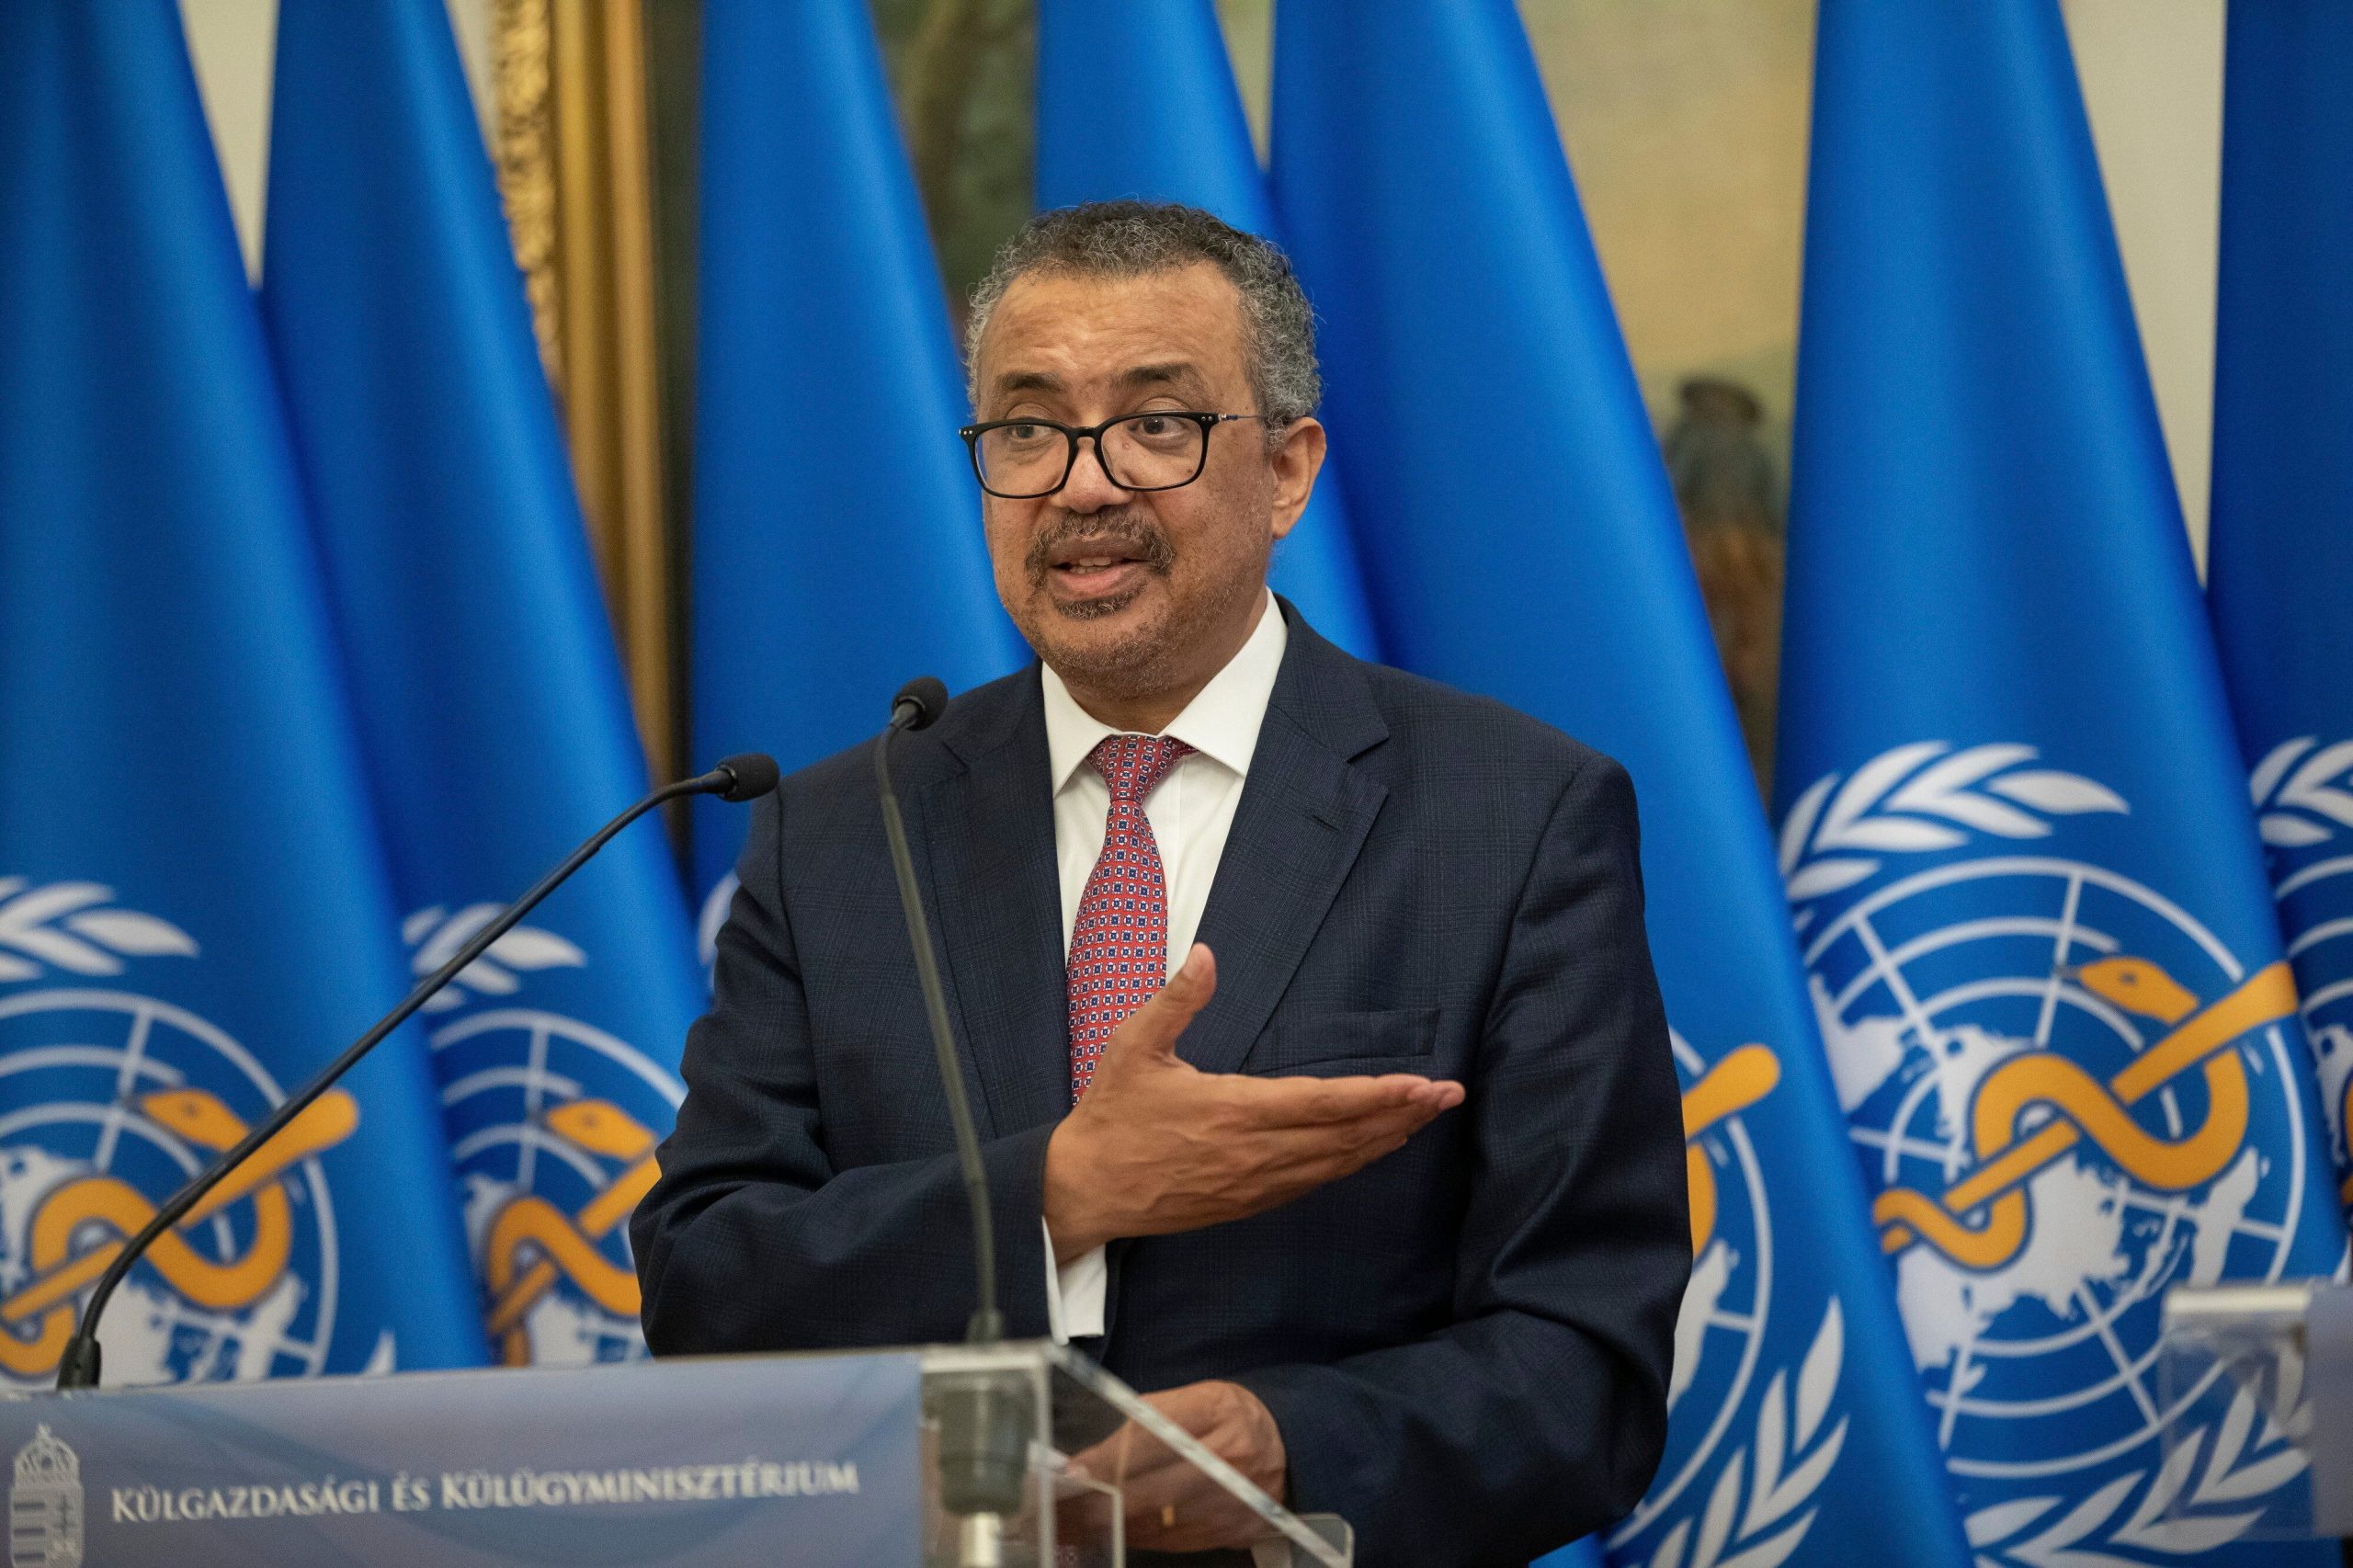 Tedros Adhanom Ghebreyesus set to remain WHO chief for another term